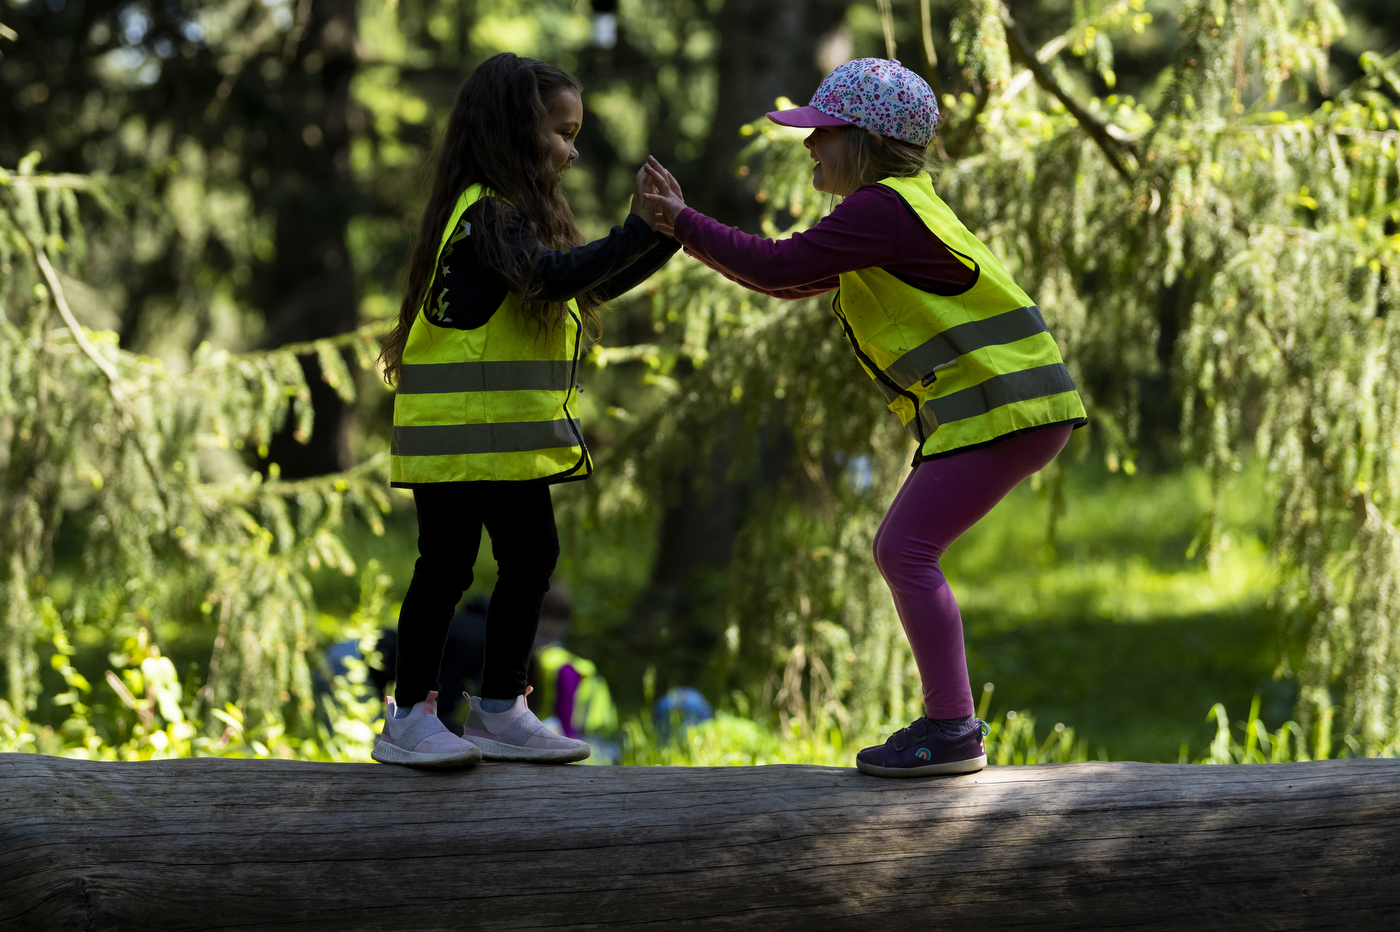 two children in neon vests playing with each other